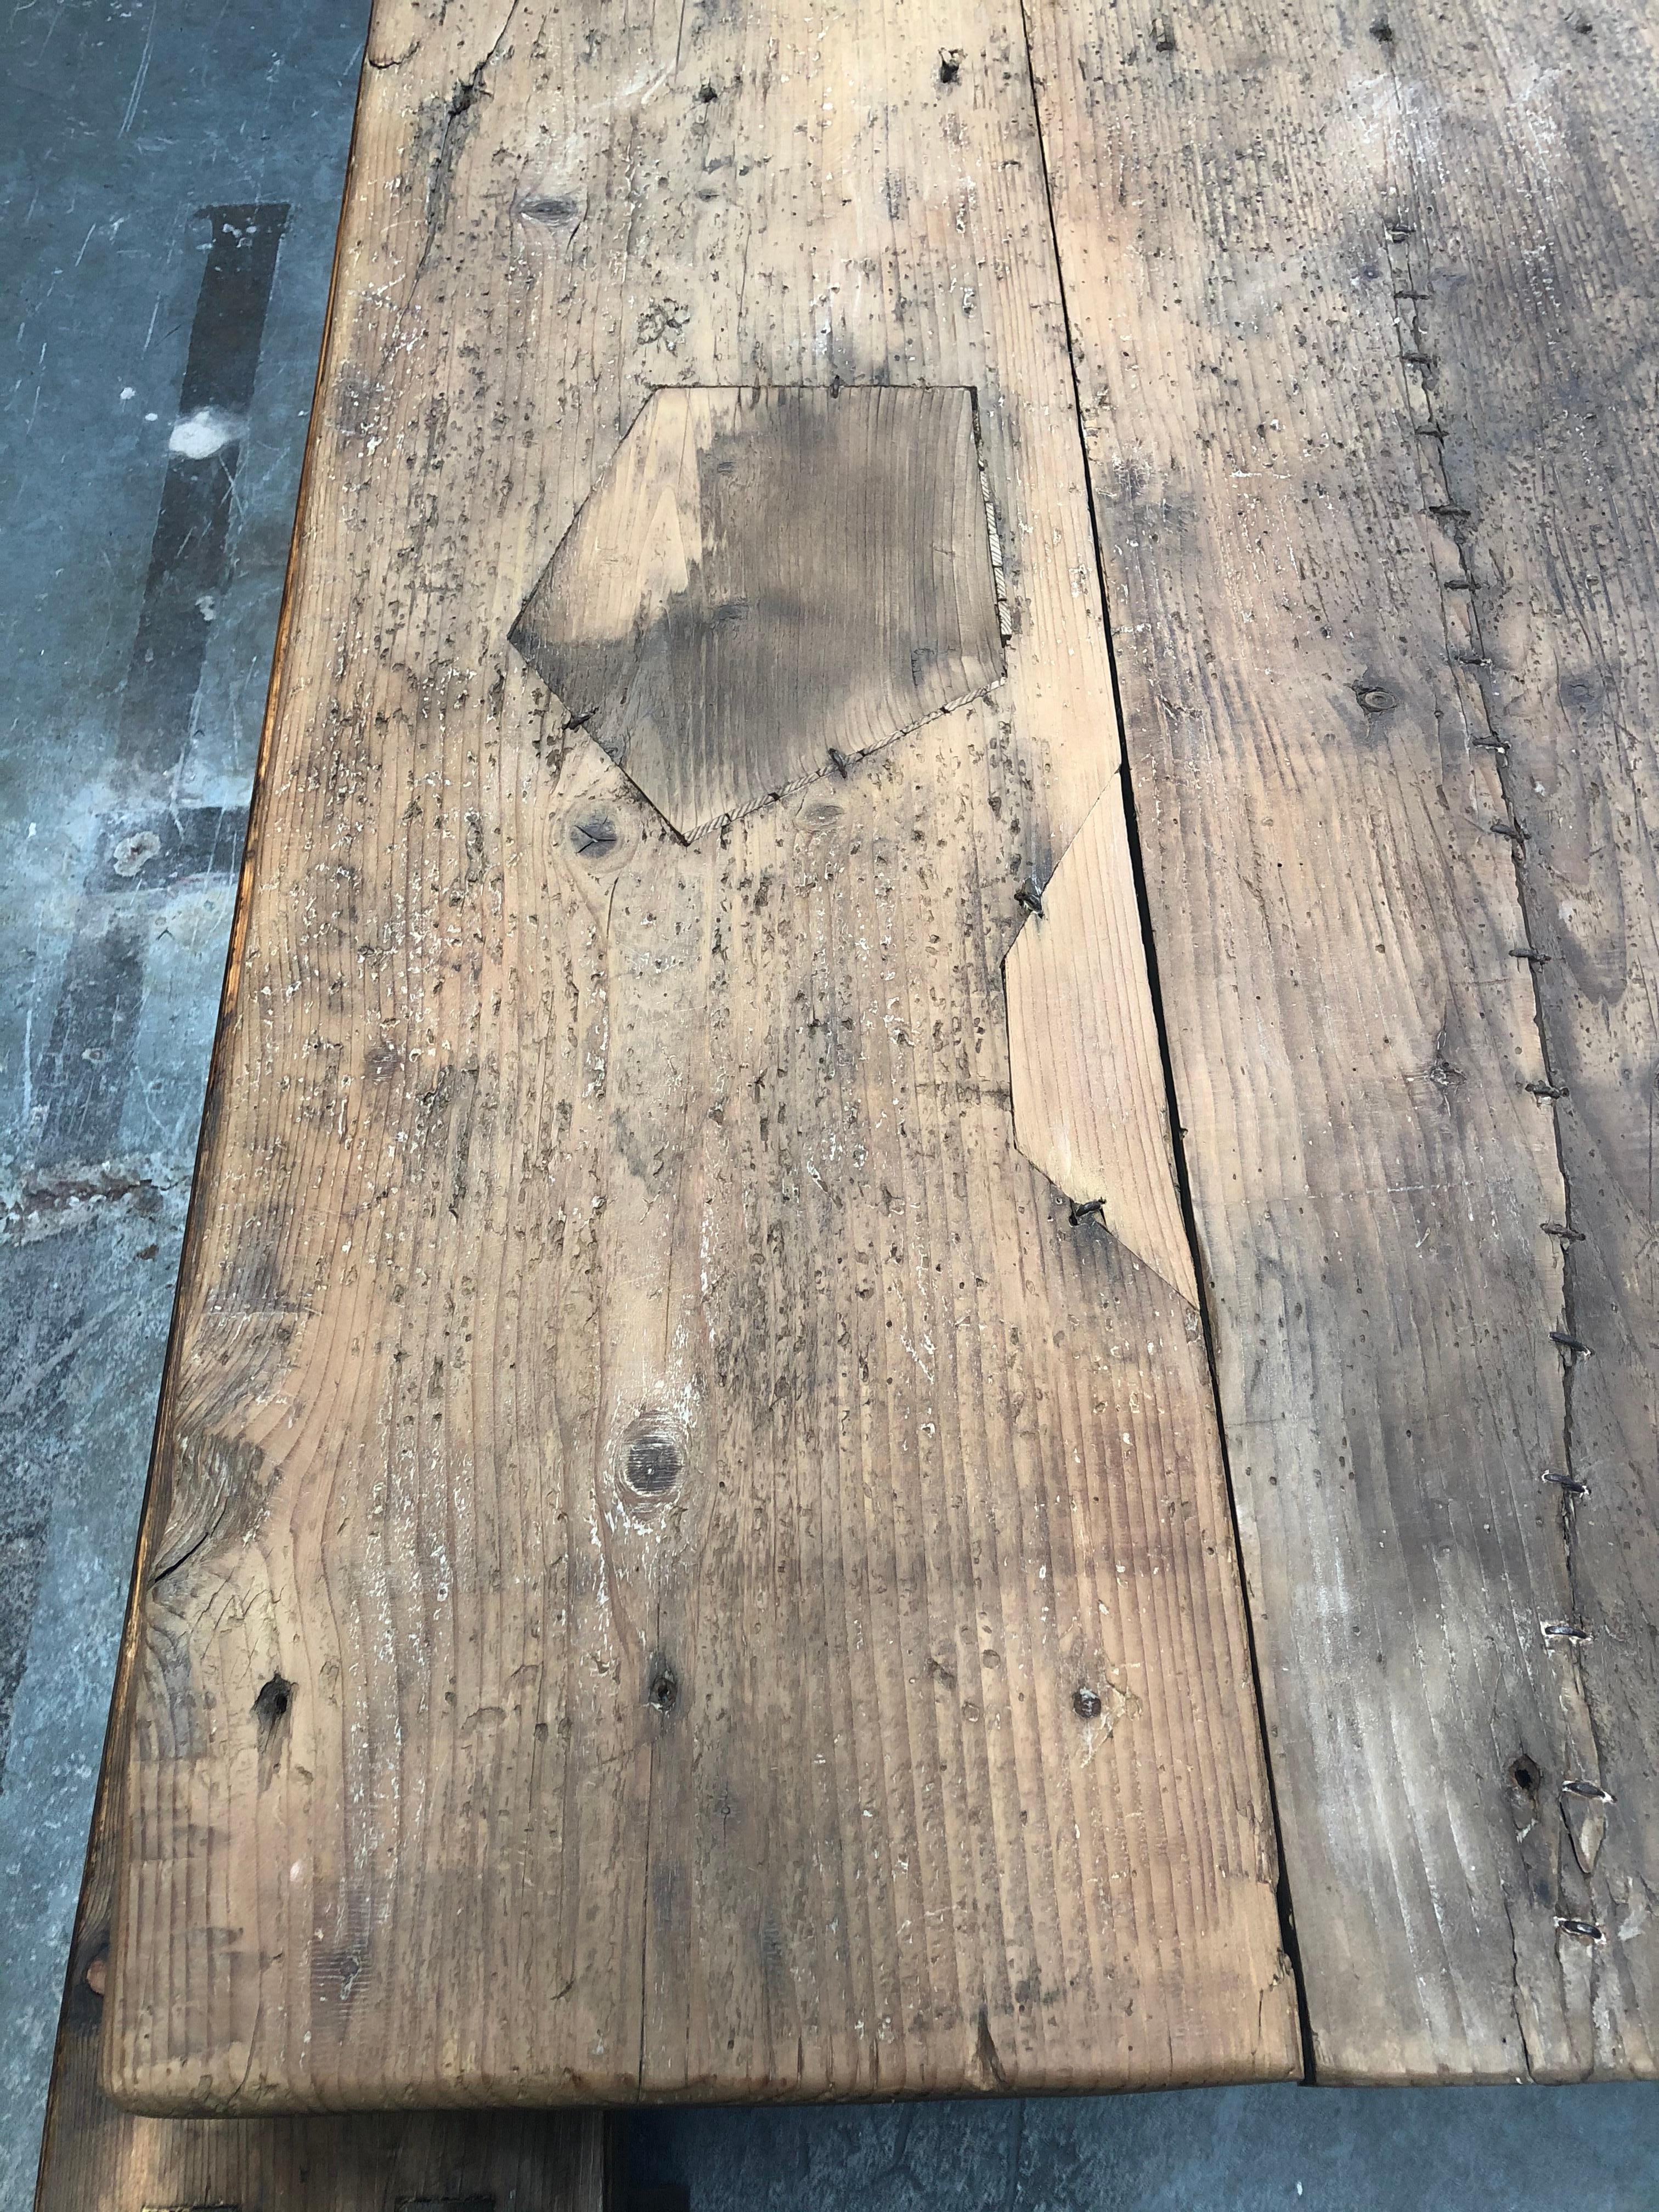 Large vintage farm house table beautifully matched with black iron legs. Farm house table is reminiscent of a Classic butcher block table. Detailed with exposed metal stitched wooden patch work. Rustic but refined. Perfect as an indoor or outdoor